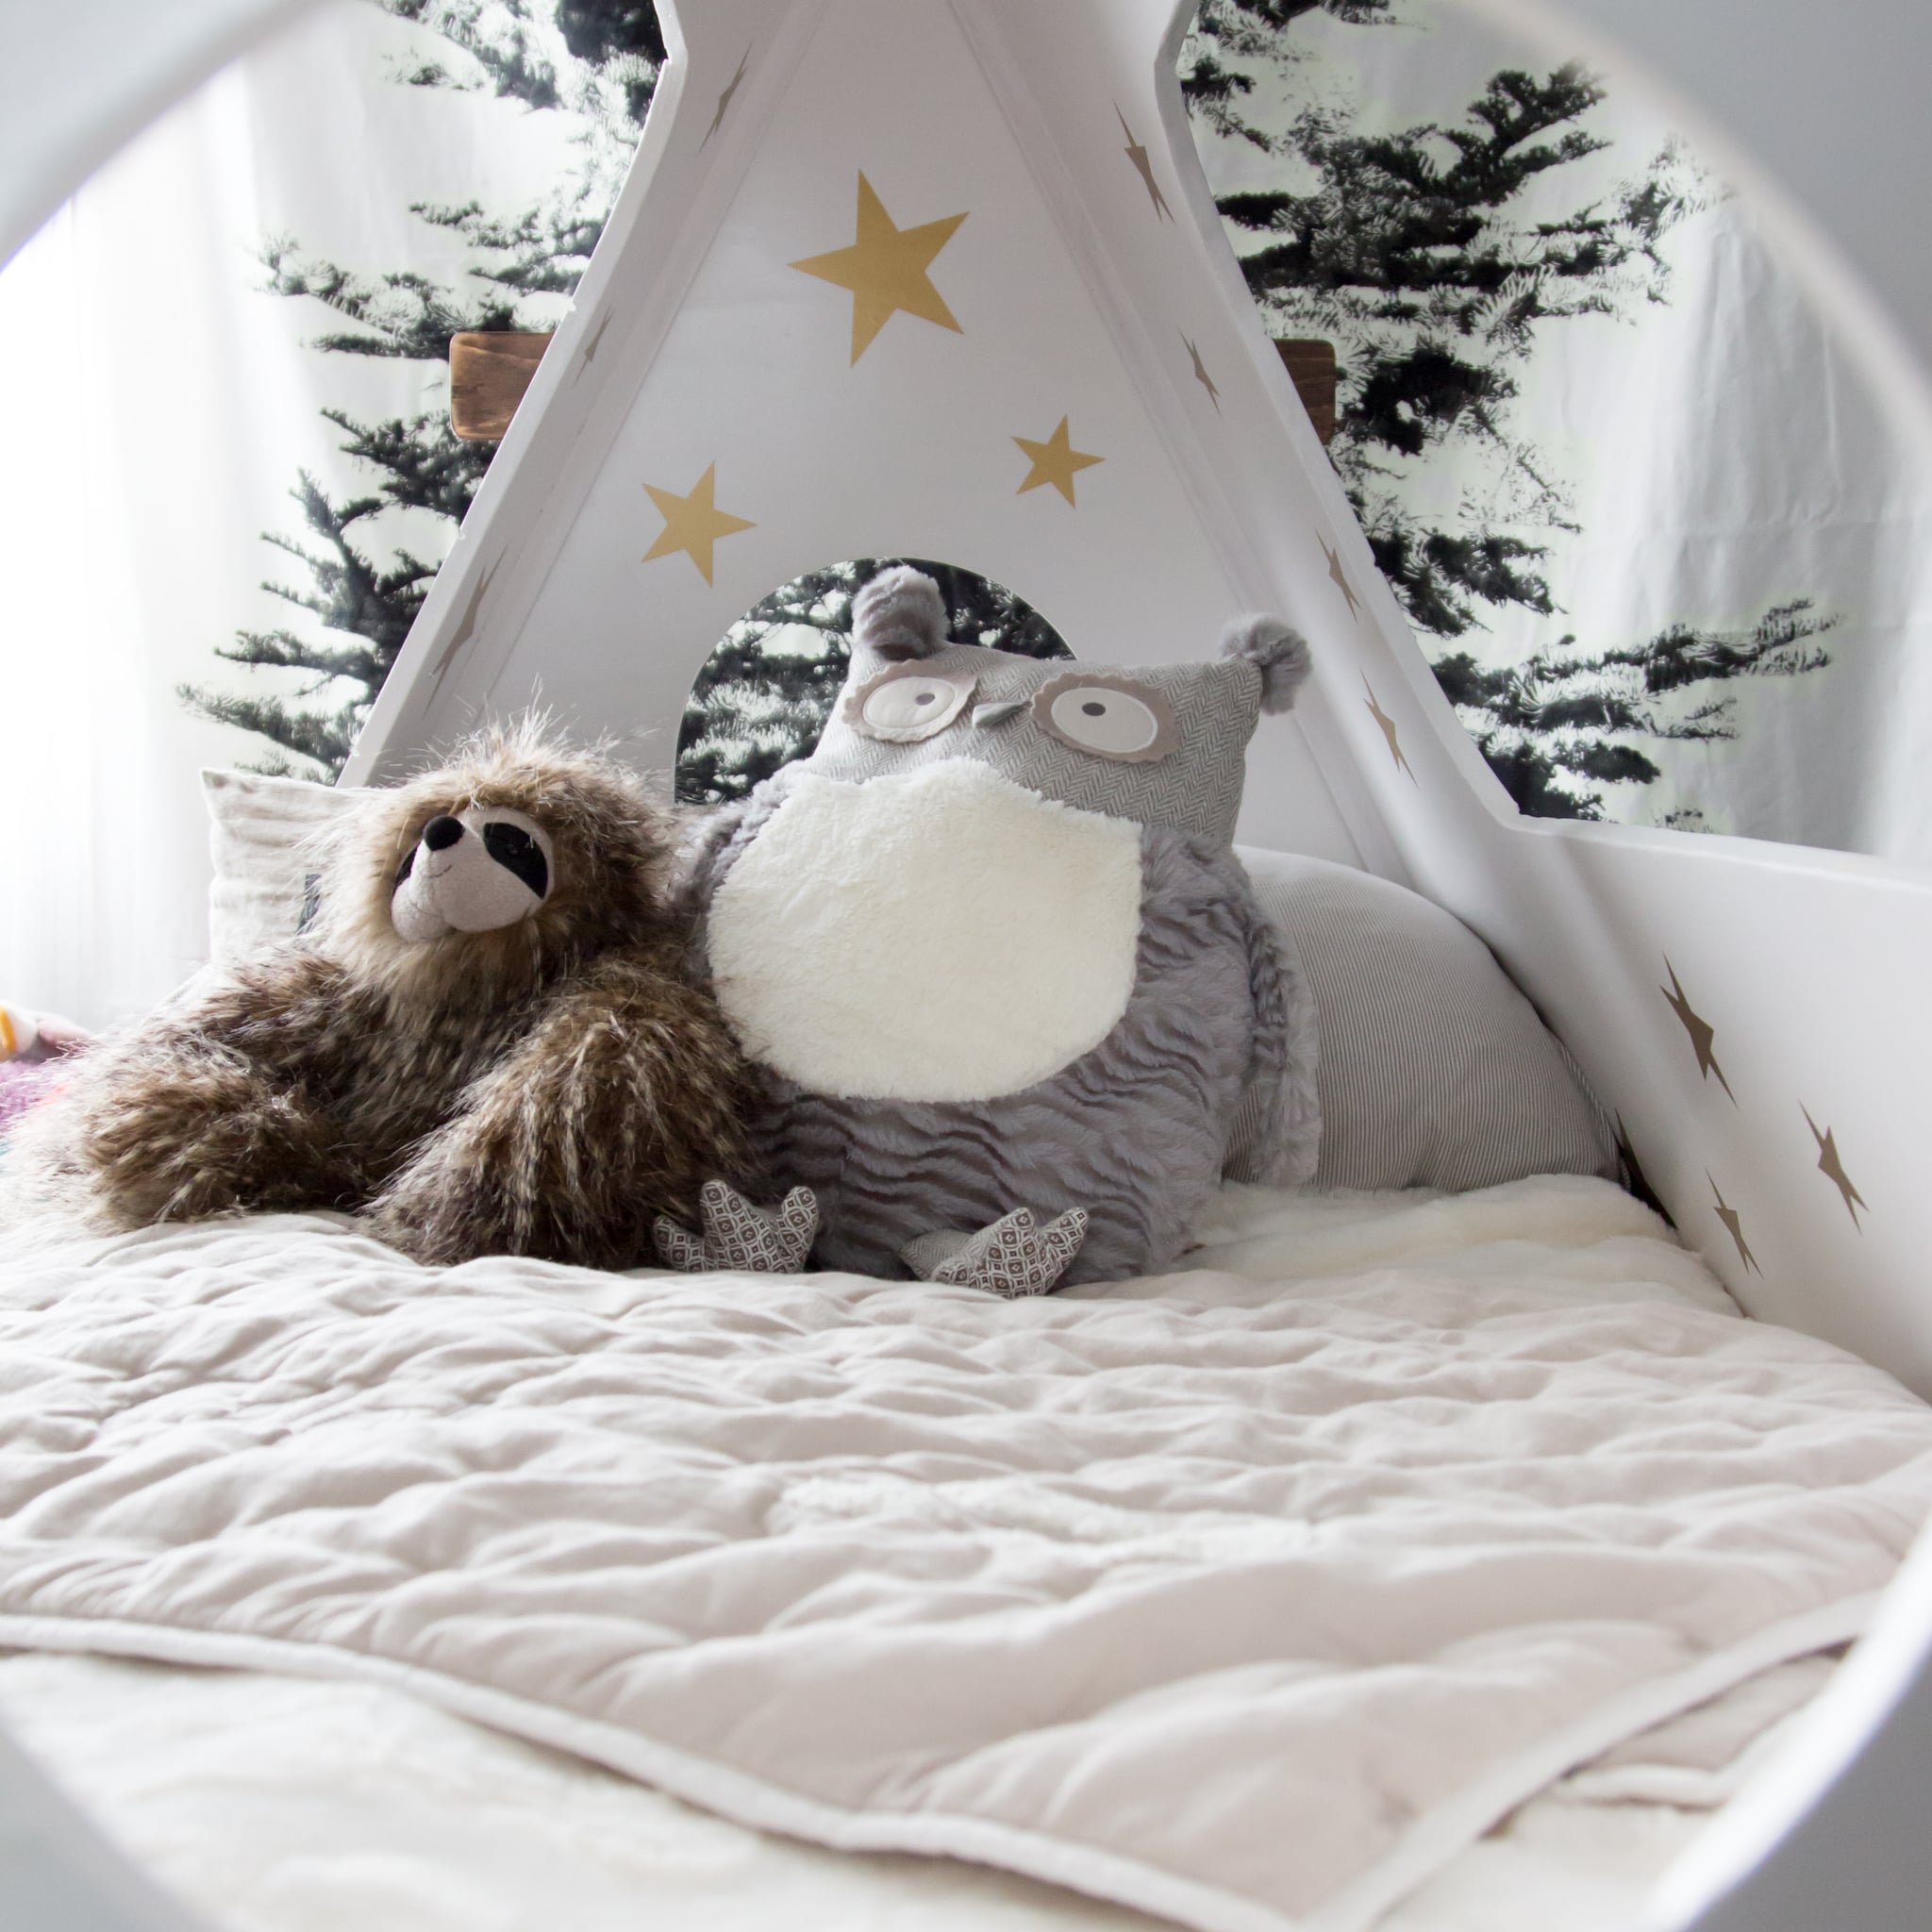 Painted stars, forest-inspired stuffed animals, and indoor foliage | This  DIY Bed Lets Kids Feel Like They're Camping All Year | POPSUGAR Home Photo 3